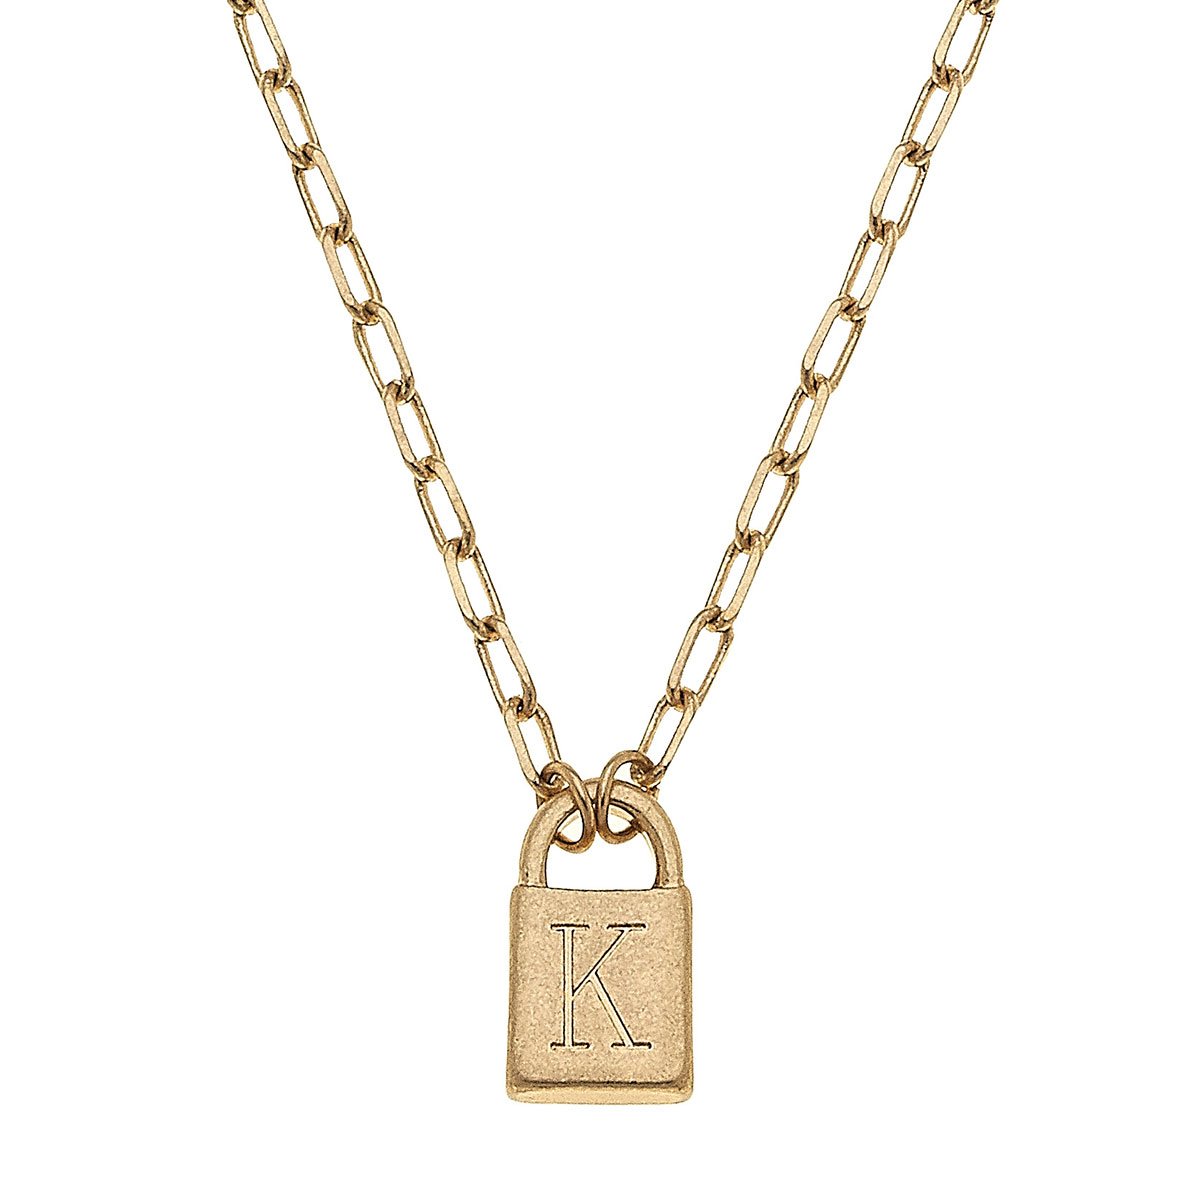 Canvas Jewelry CJ 21769N-GD Initial Padlock Necklace - Worn Gold